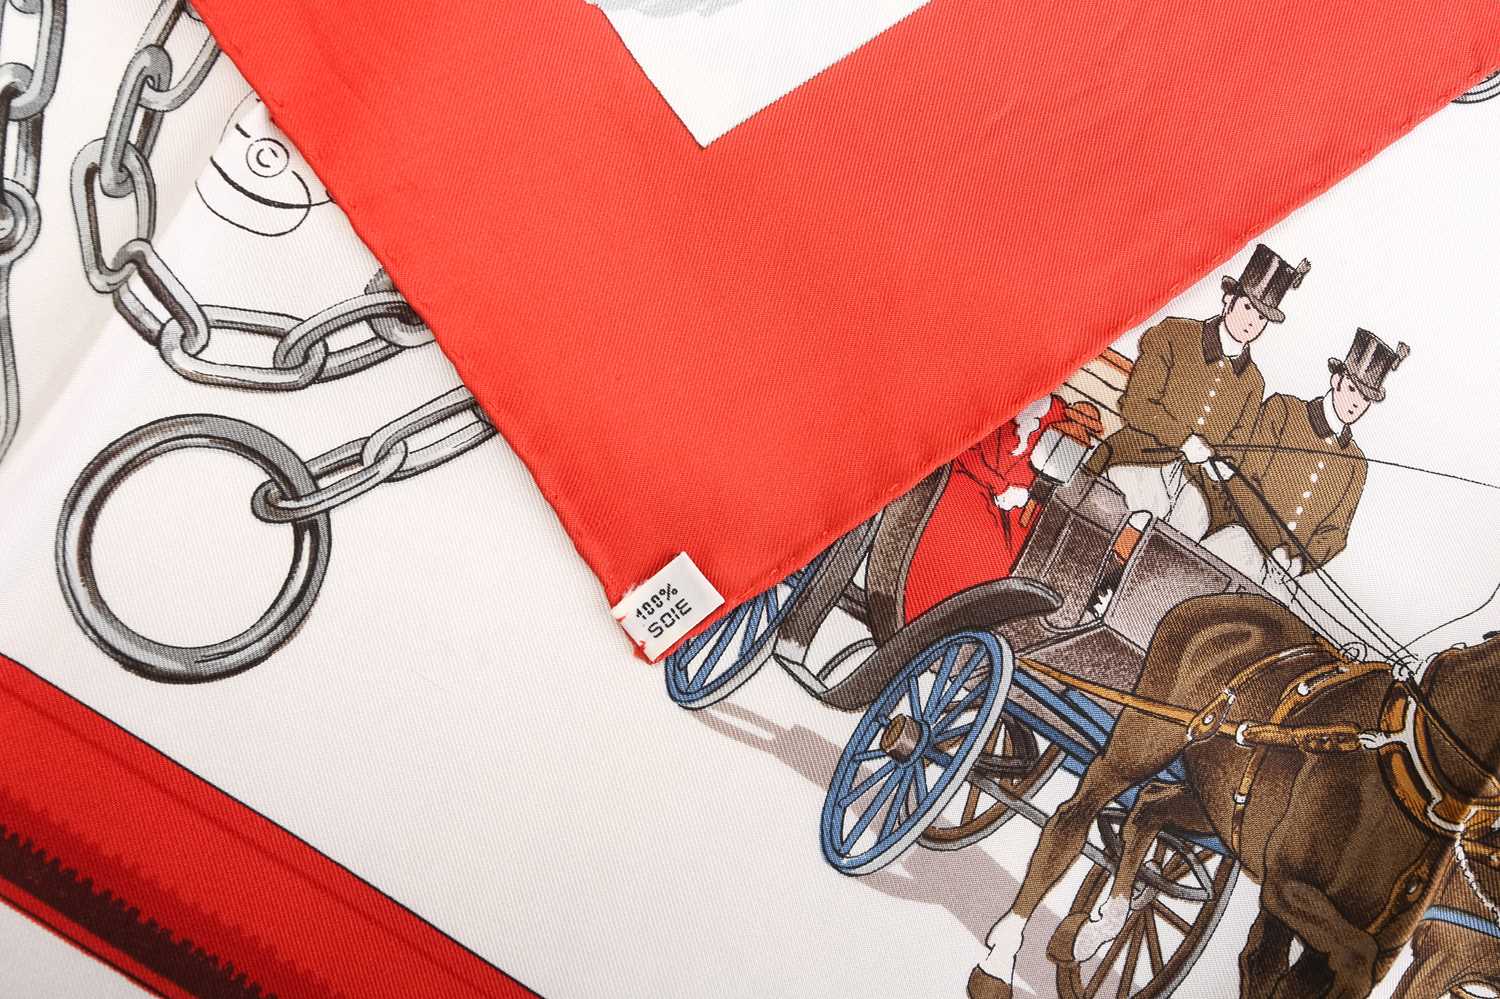 Hermès - 'Équipages (The Crew)' silk square scarf in red, of equestrian theme, designed by Phillippe - Image 3 of 7